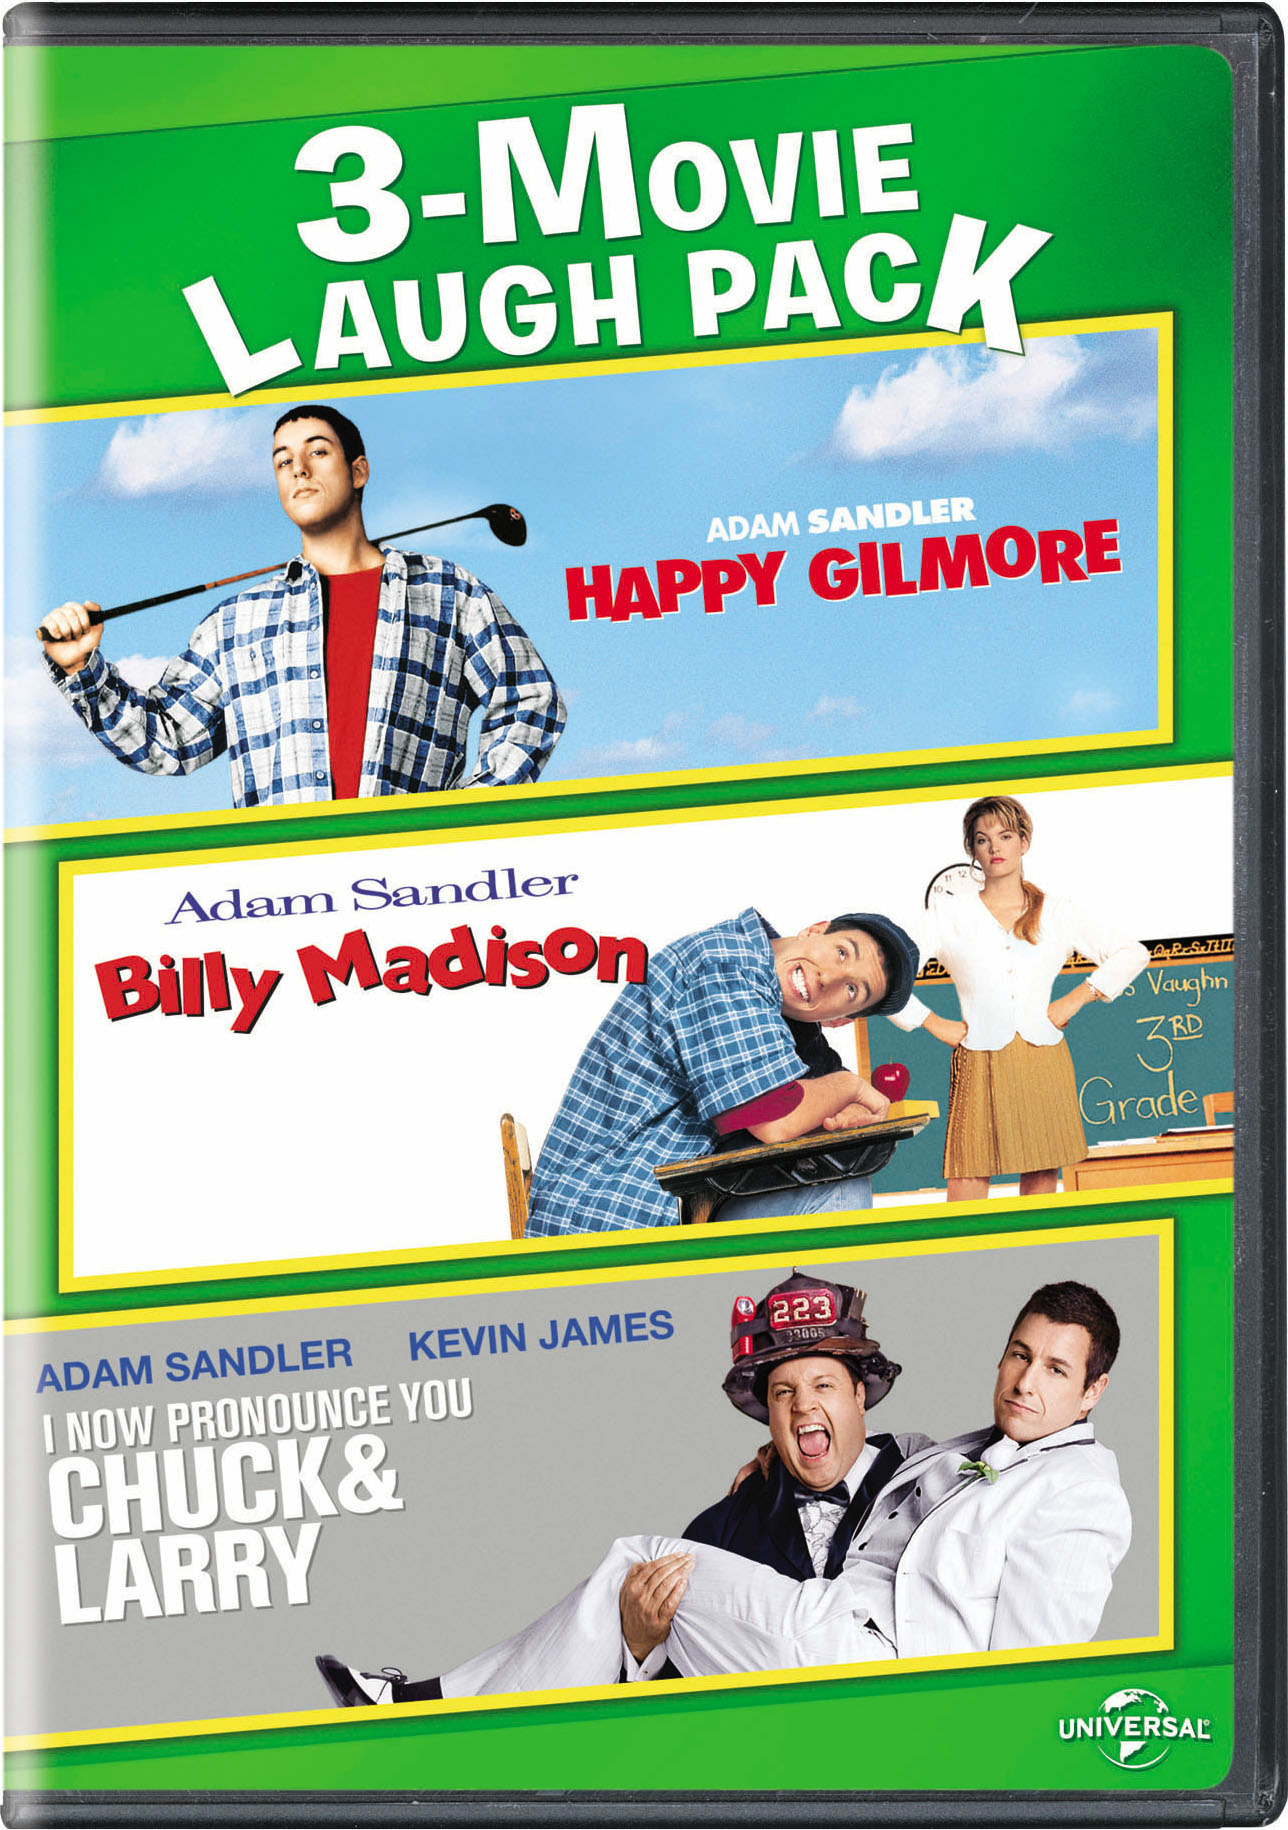 Happy Gilmore/Billy Madison/I Now Pronounce You Chuck & Larry (DVD Set) - DVD   - Comedy Movies On DVD - Movies On GRUV